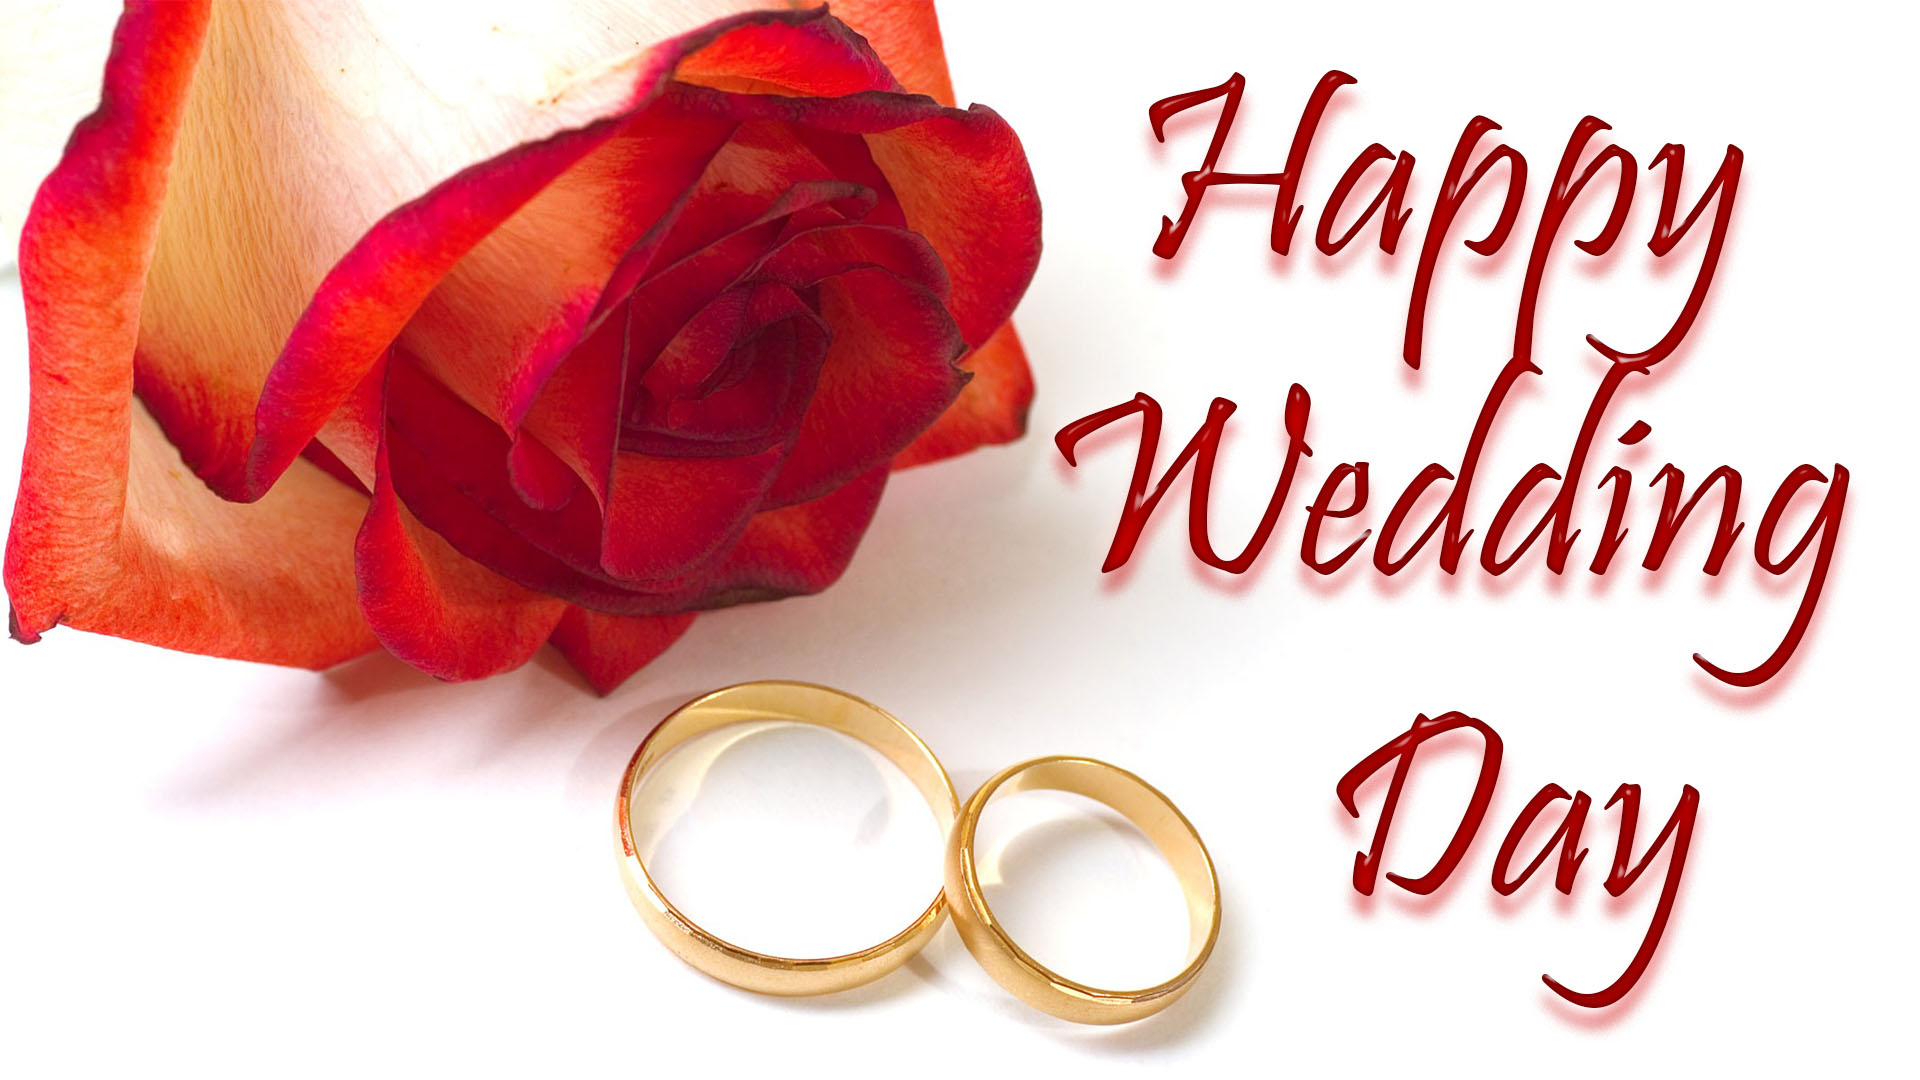 wedding day wishes hd image